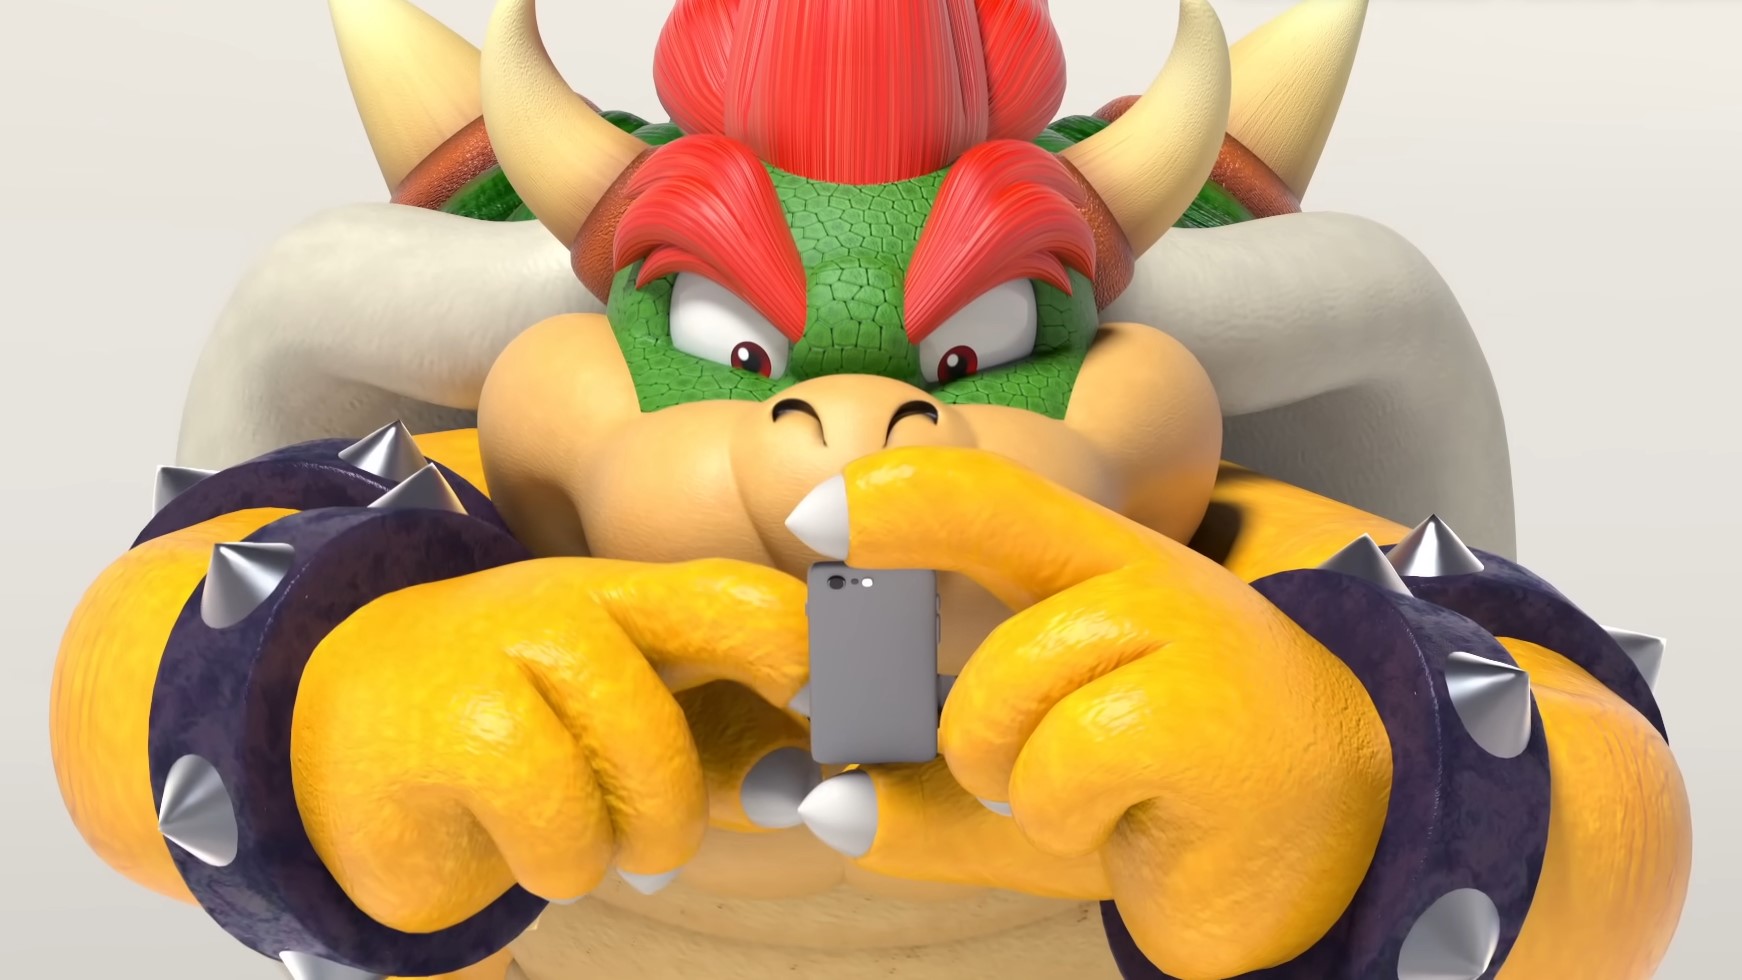 Nintendo Has Revealed Bowser's Actual Age And I'm Having A Crisis